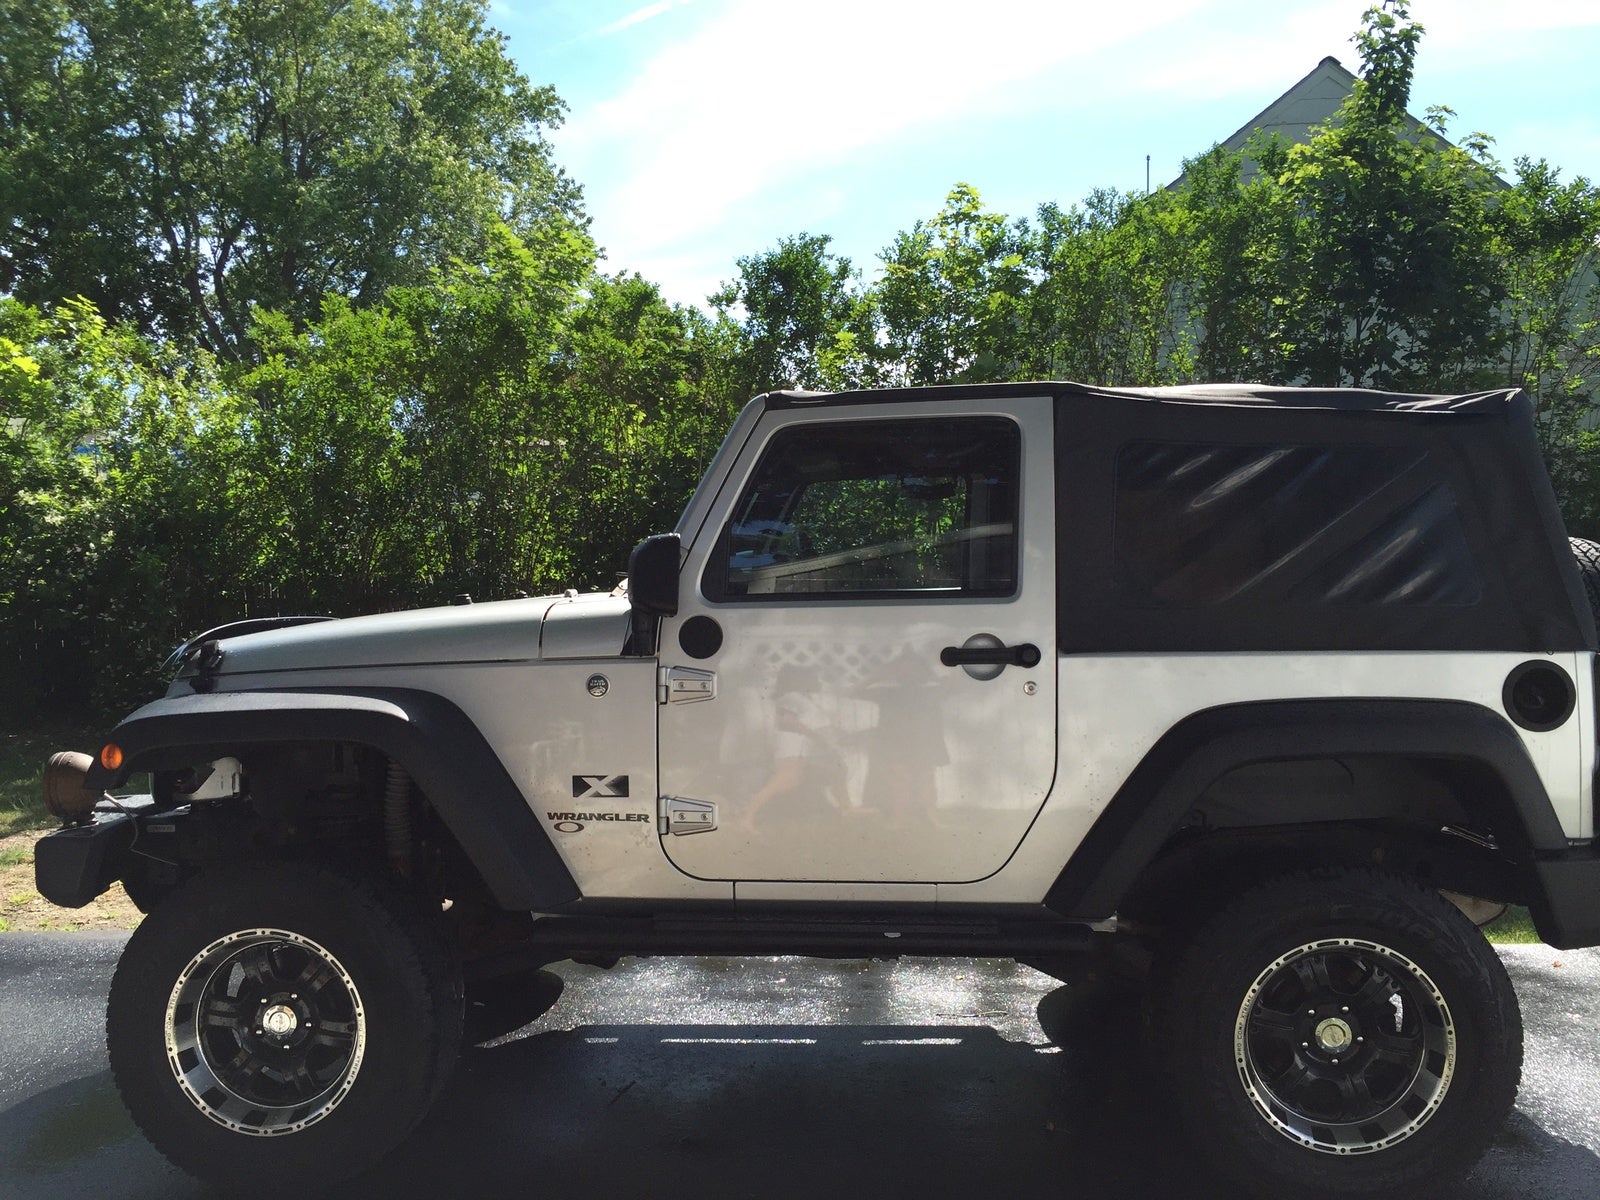 Jeep Wrangler Questions - My 2007 Jeep wrangler X has an O and a picture of  a gieko or lizard on... - CarGurus